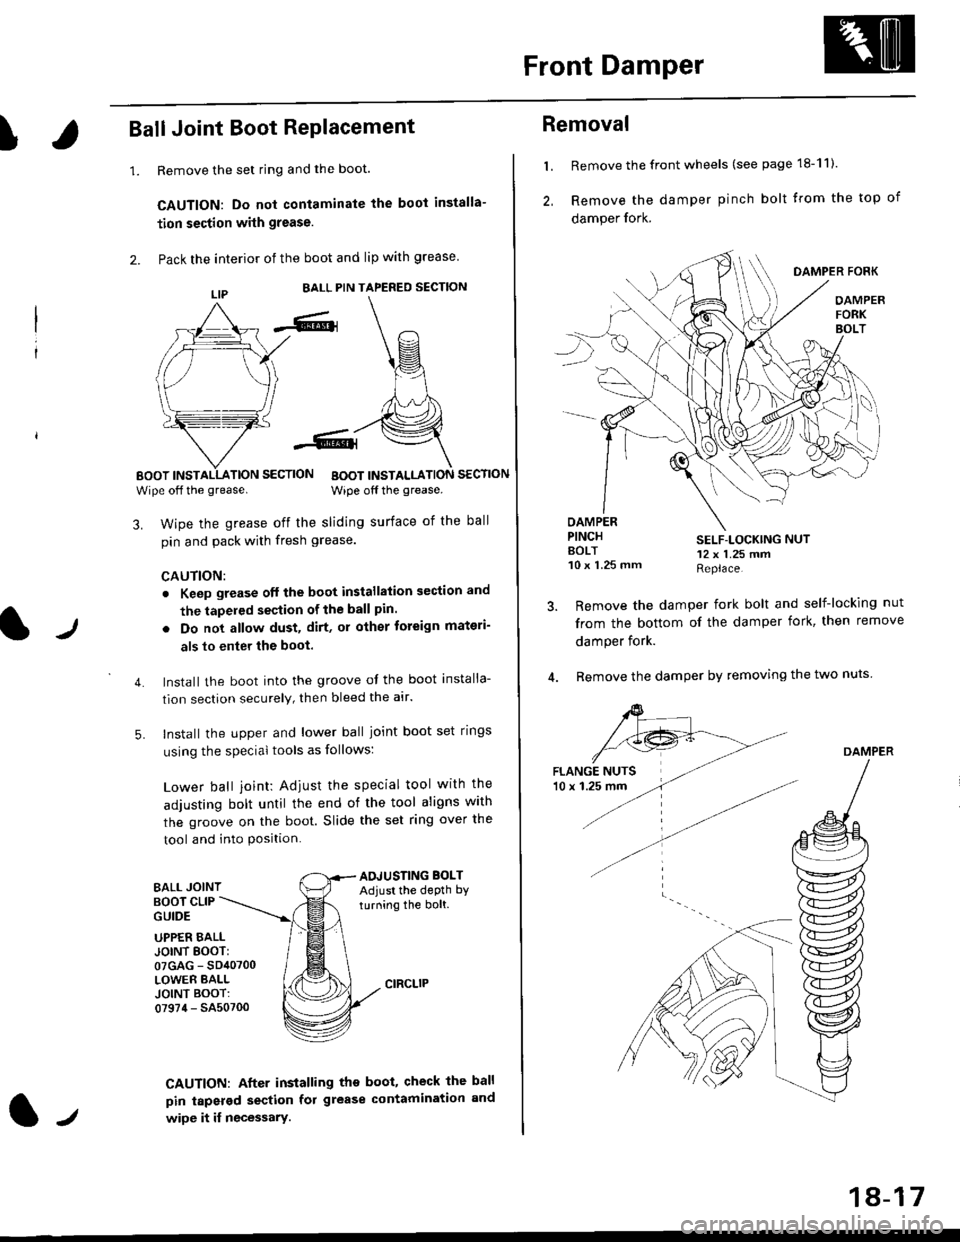 HONDA CIVIC 1996 6.G Owners Guide Front Damper
!Ball Joint Boot RePlacement
1.Remove the set ring and the boot.
CAUTION: Do not contaminate the boot installa-
tion section with grease.
Pack the interior of the boot and lip with grease